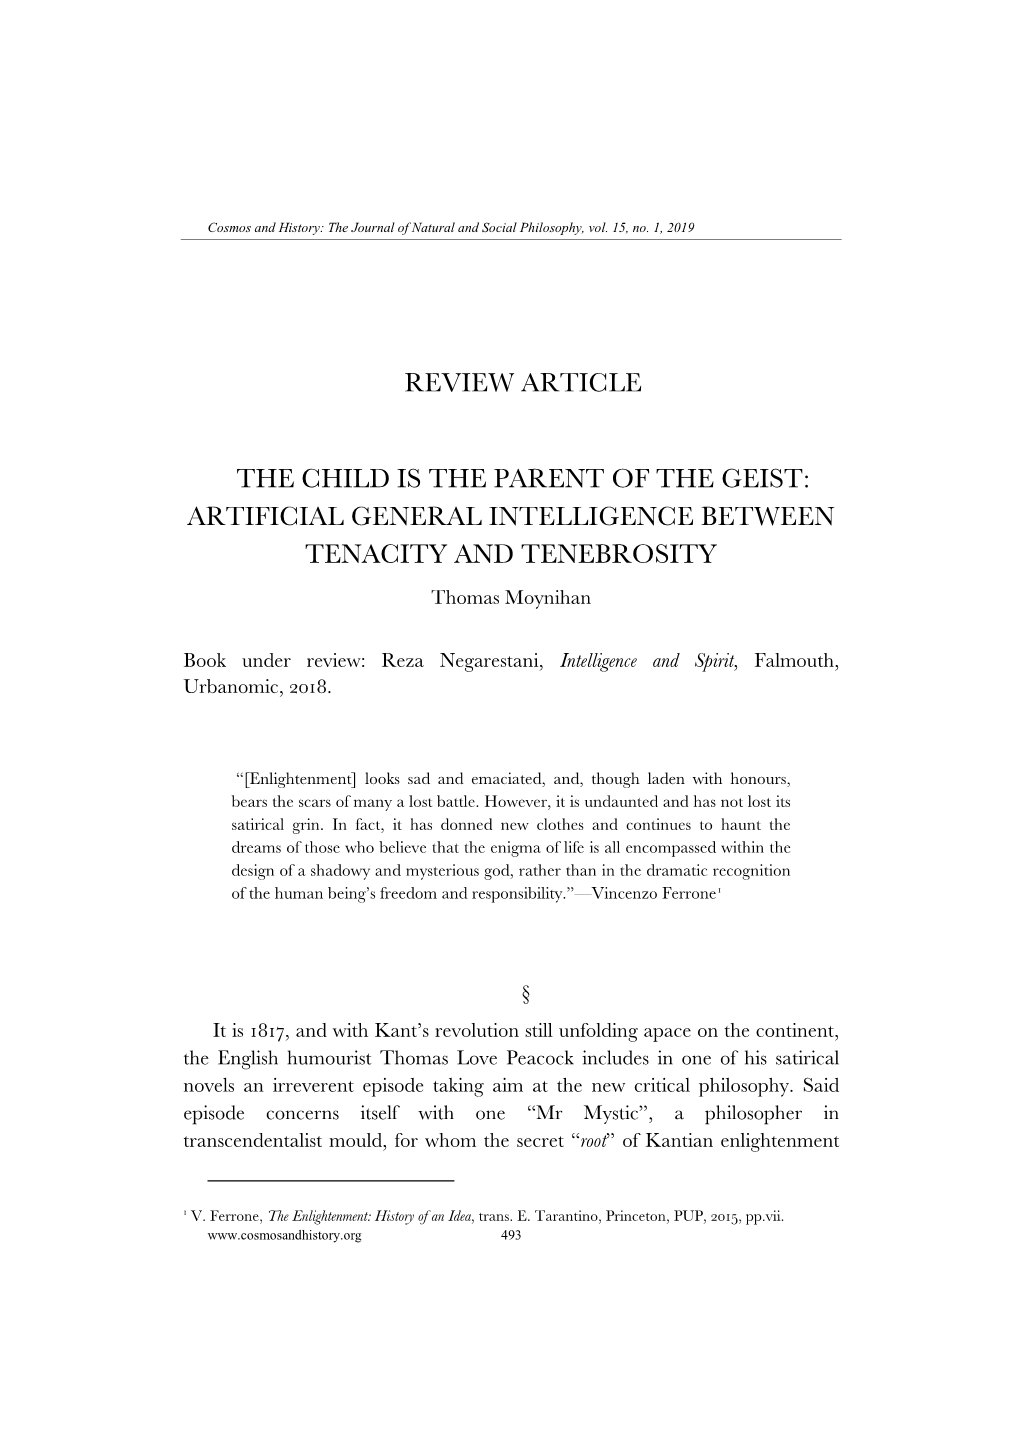 Review Article the Child Is the Parent of the Geist